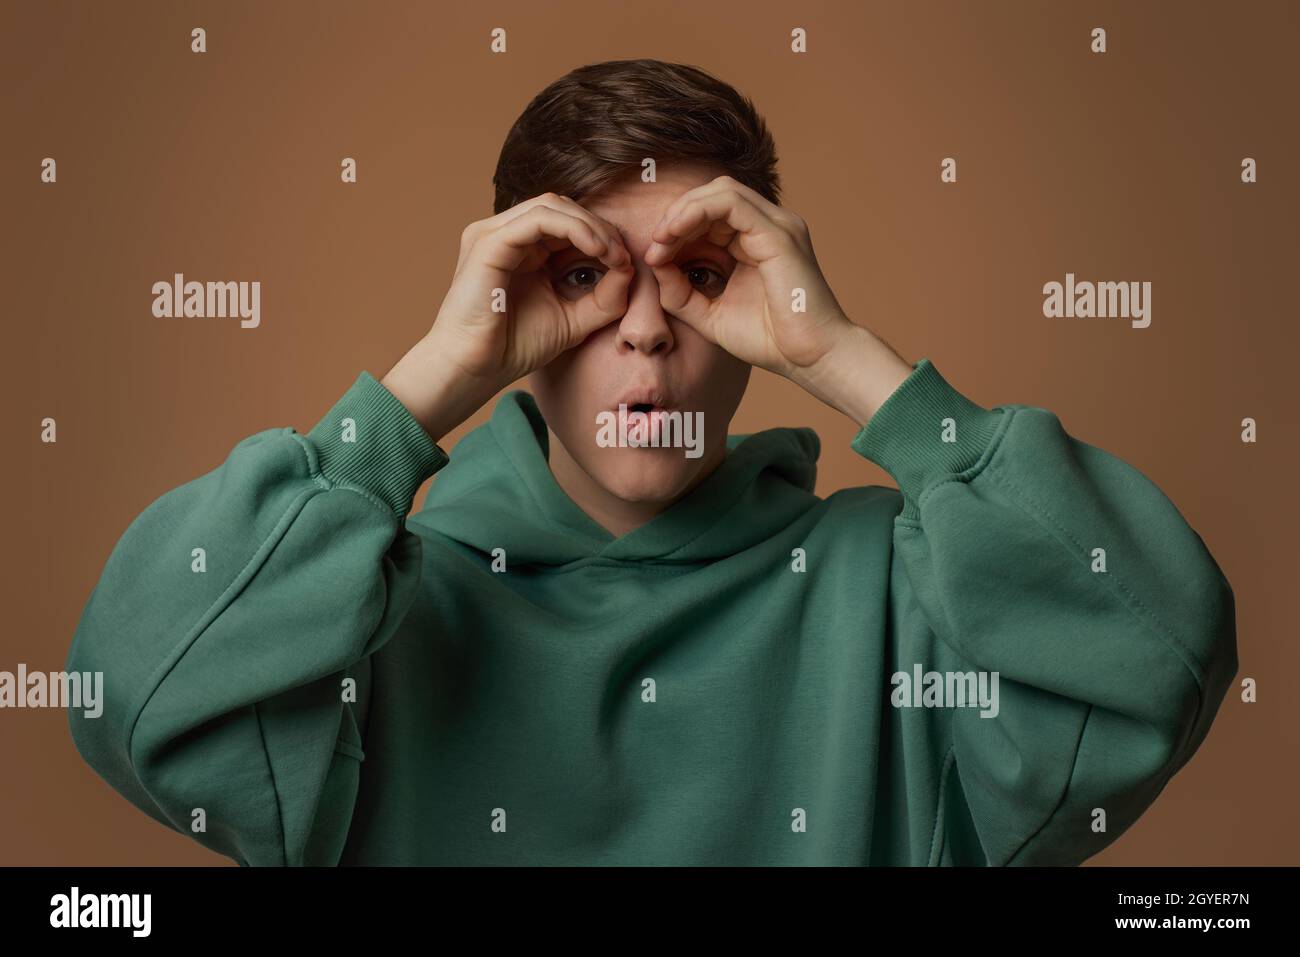 young guy in sweatshirt holding his hands at his eyes as if looking through binoculars Stock Photo